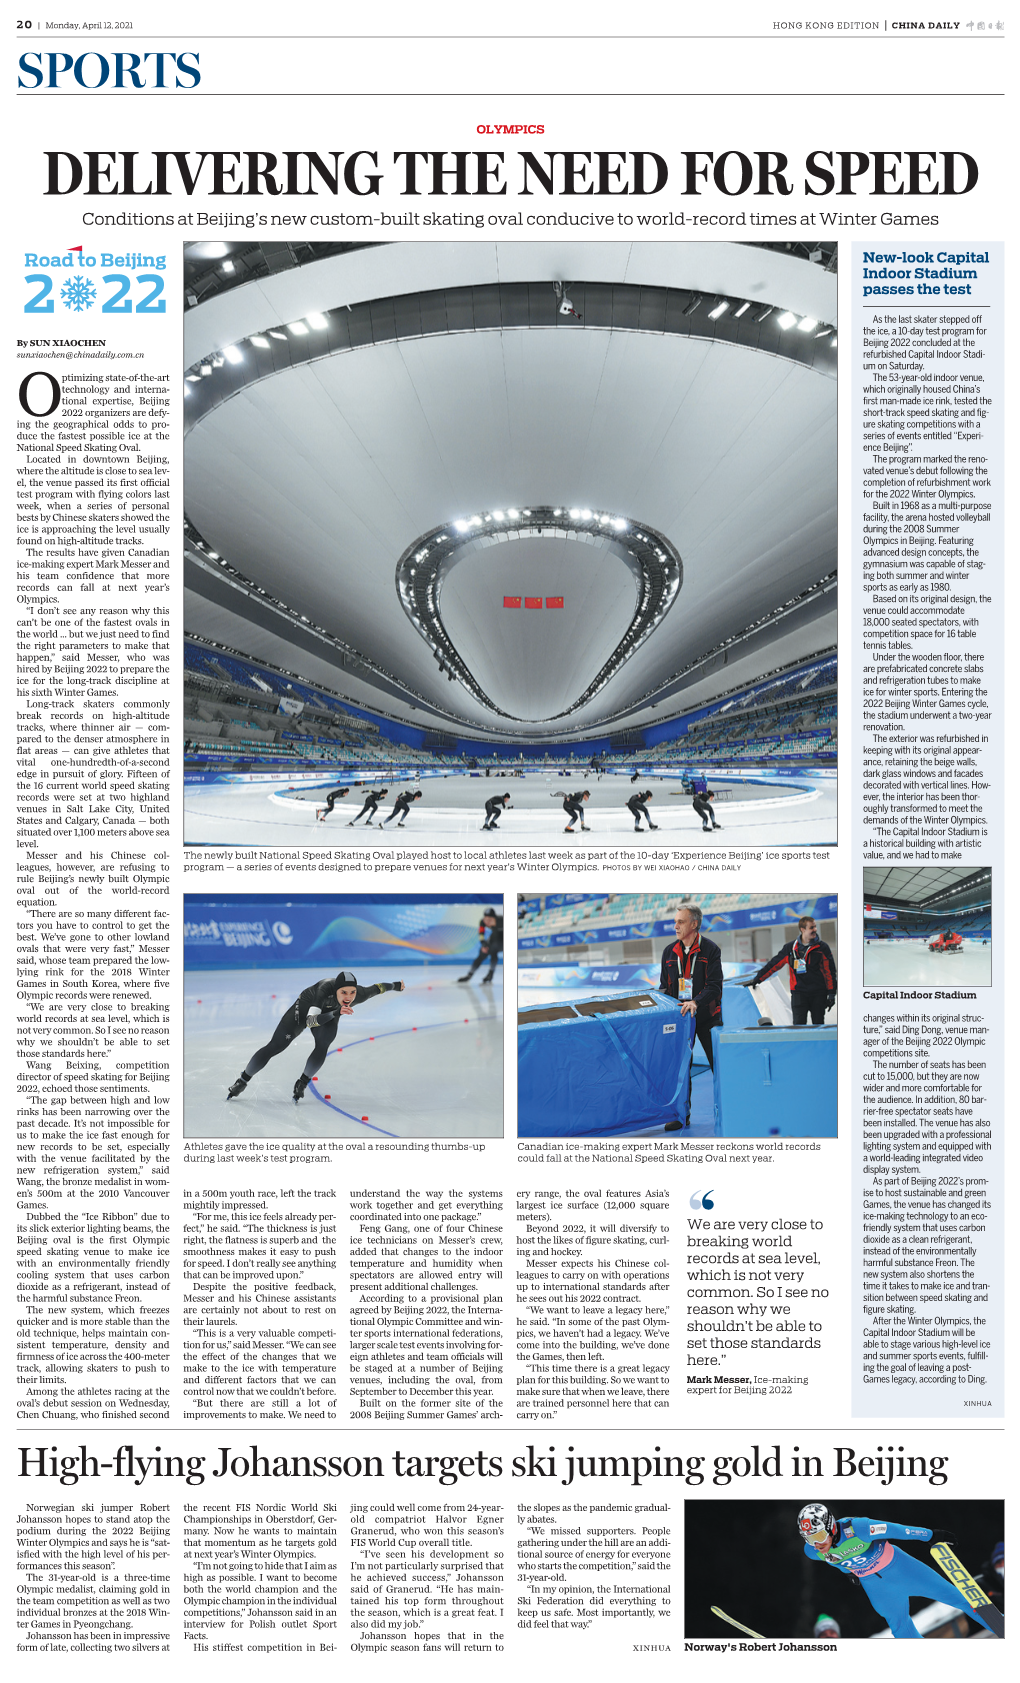 DELIVERING the NEED for SPEED Conditions at Beijing’S New Custom­Built Skating Oval Conducive to World­Record Times at Winter Games